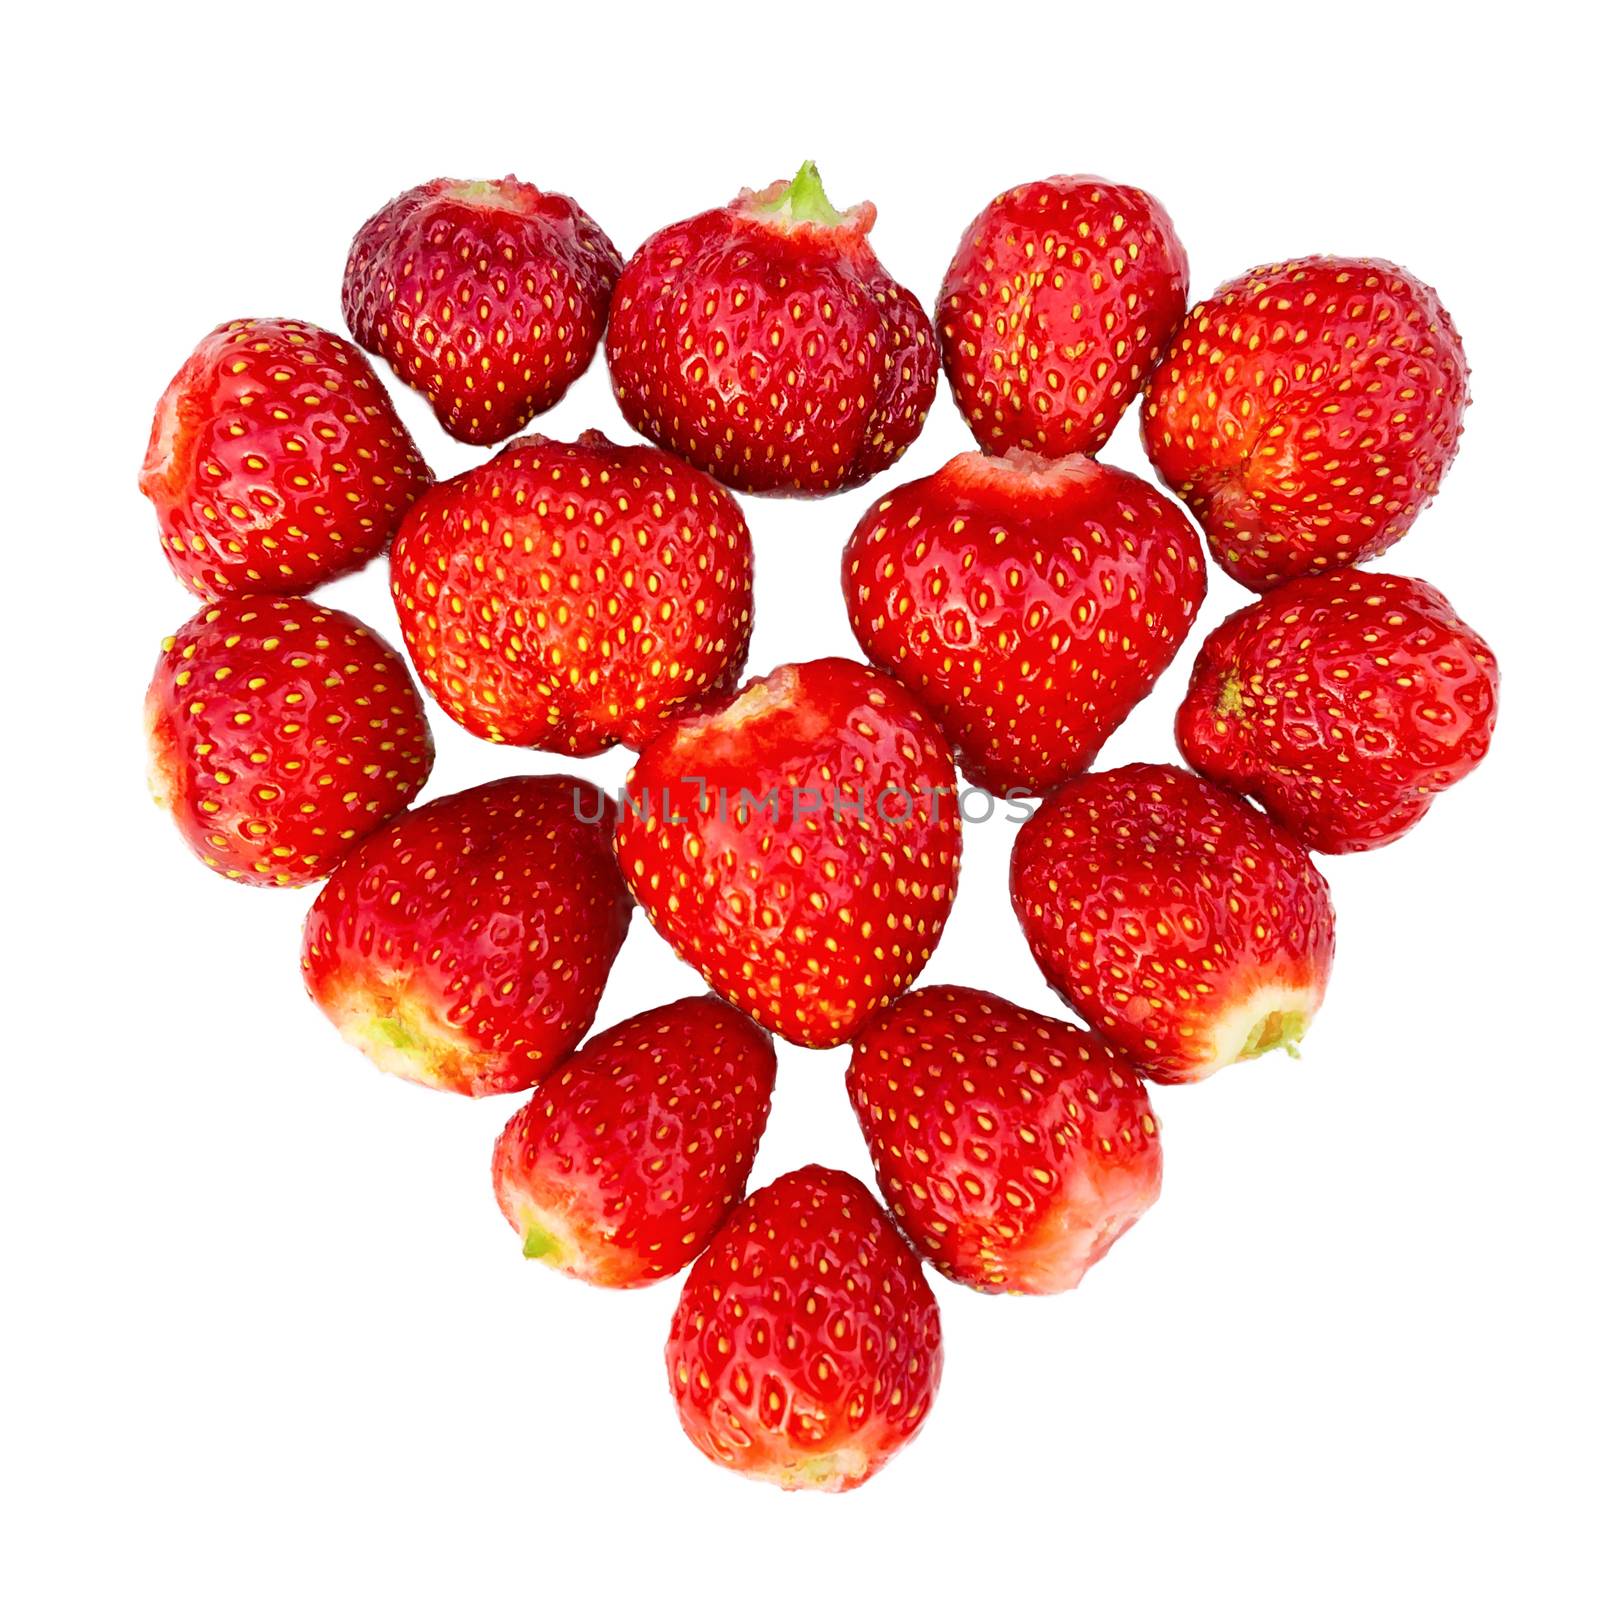 Fresh ripe strawberries laid out in the shape of a heart - love concept for design, isolated on white background.